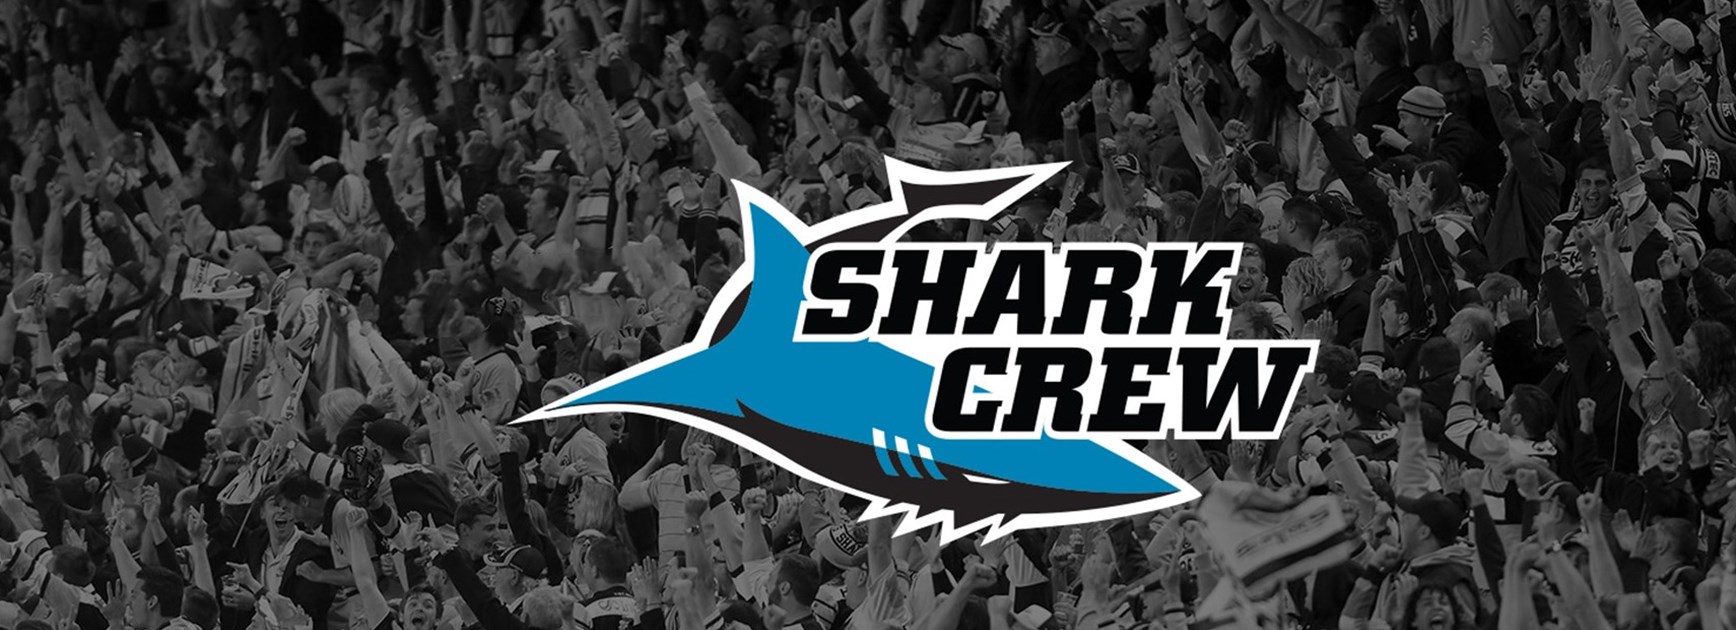 Join the Shark Crew in 2022